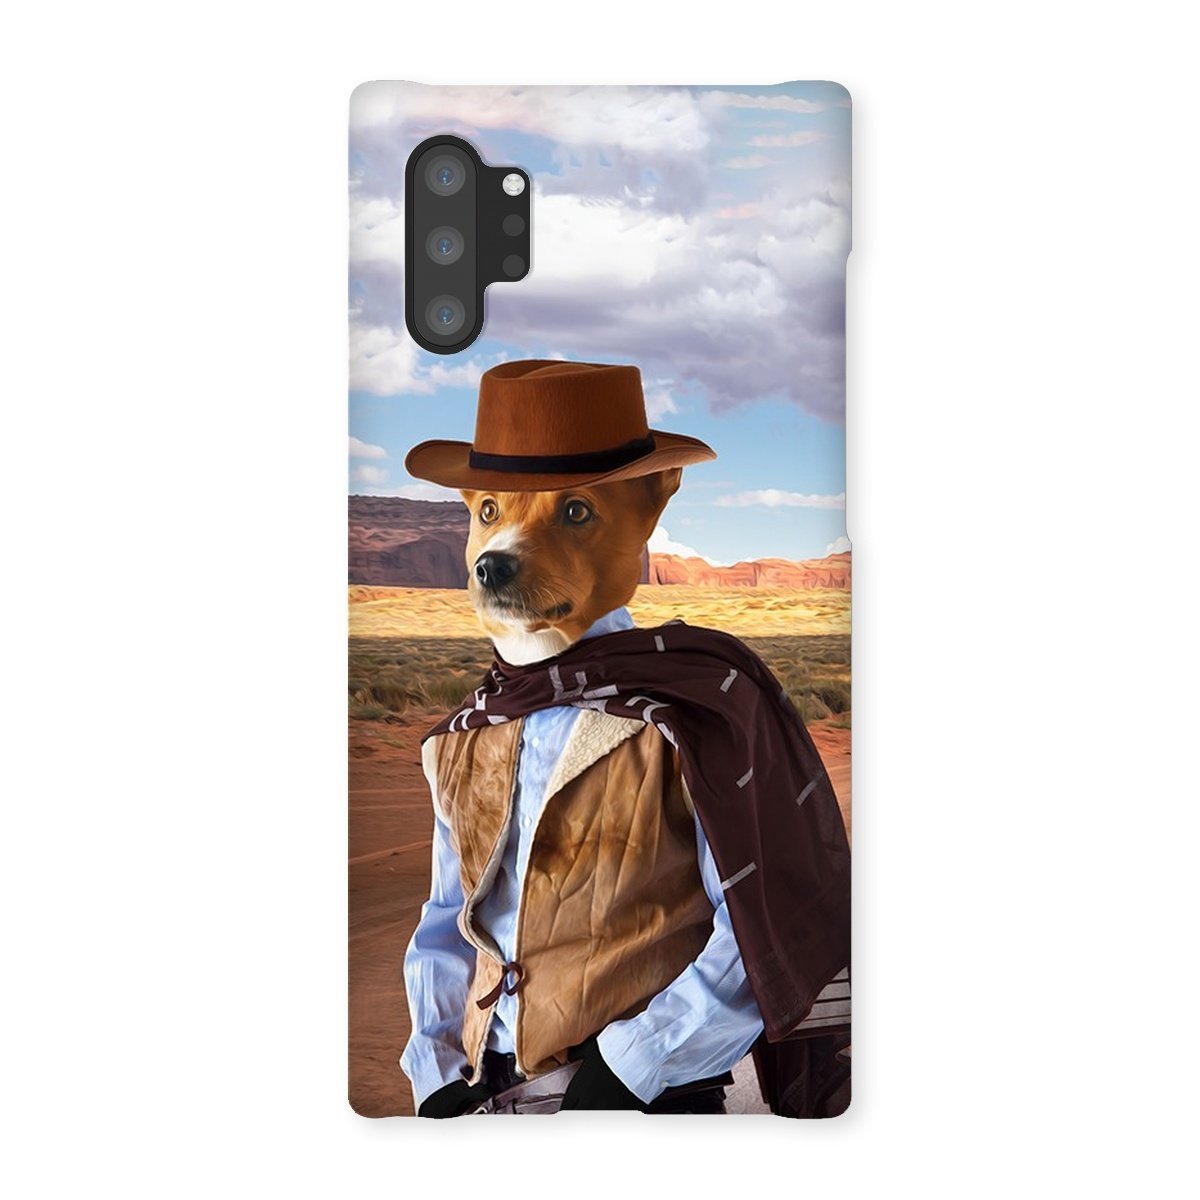 The Outlaw: Custom Pet Phone Case - Paw & Glory - paw and glory, dog mum phone case, personalized puppy phone case, pet portrait phone case, dog phone case custom, pet portrait phone case, personalised dog phone case uk, Pet Portrait phone case,